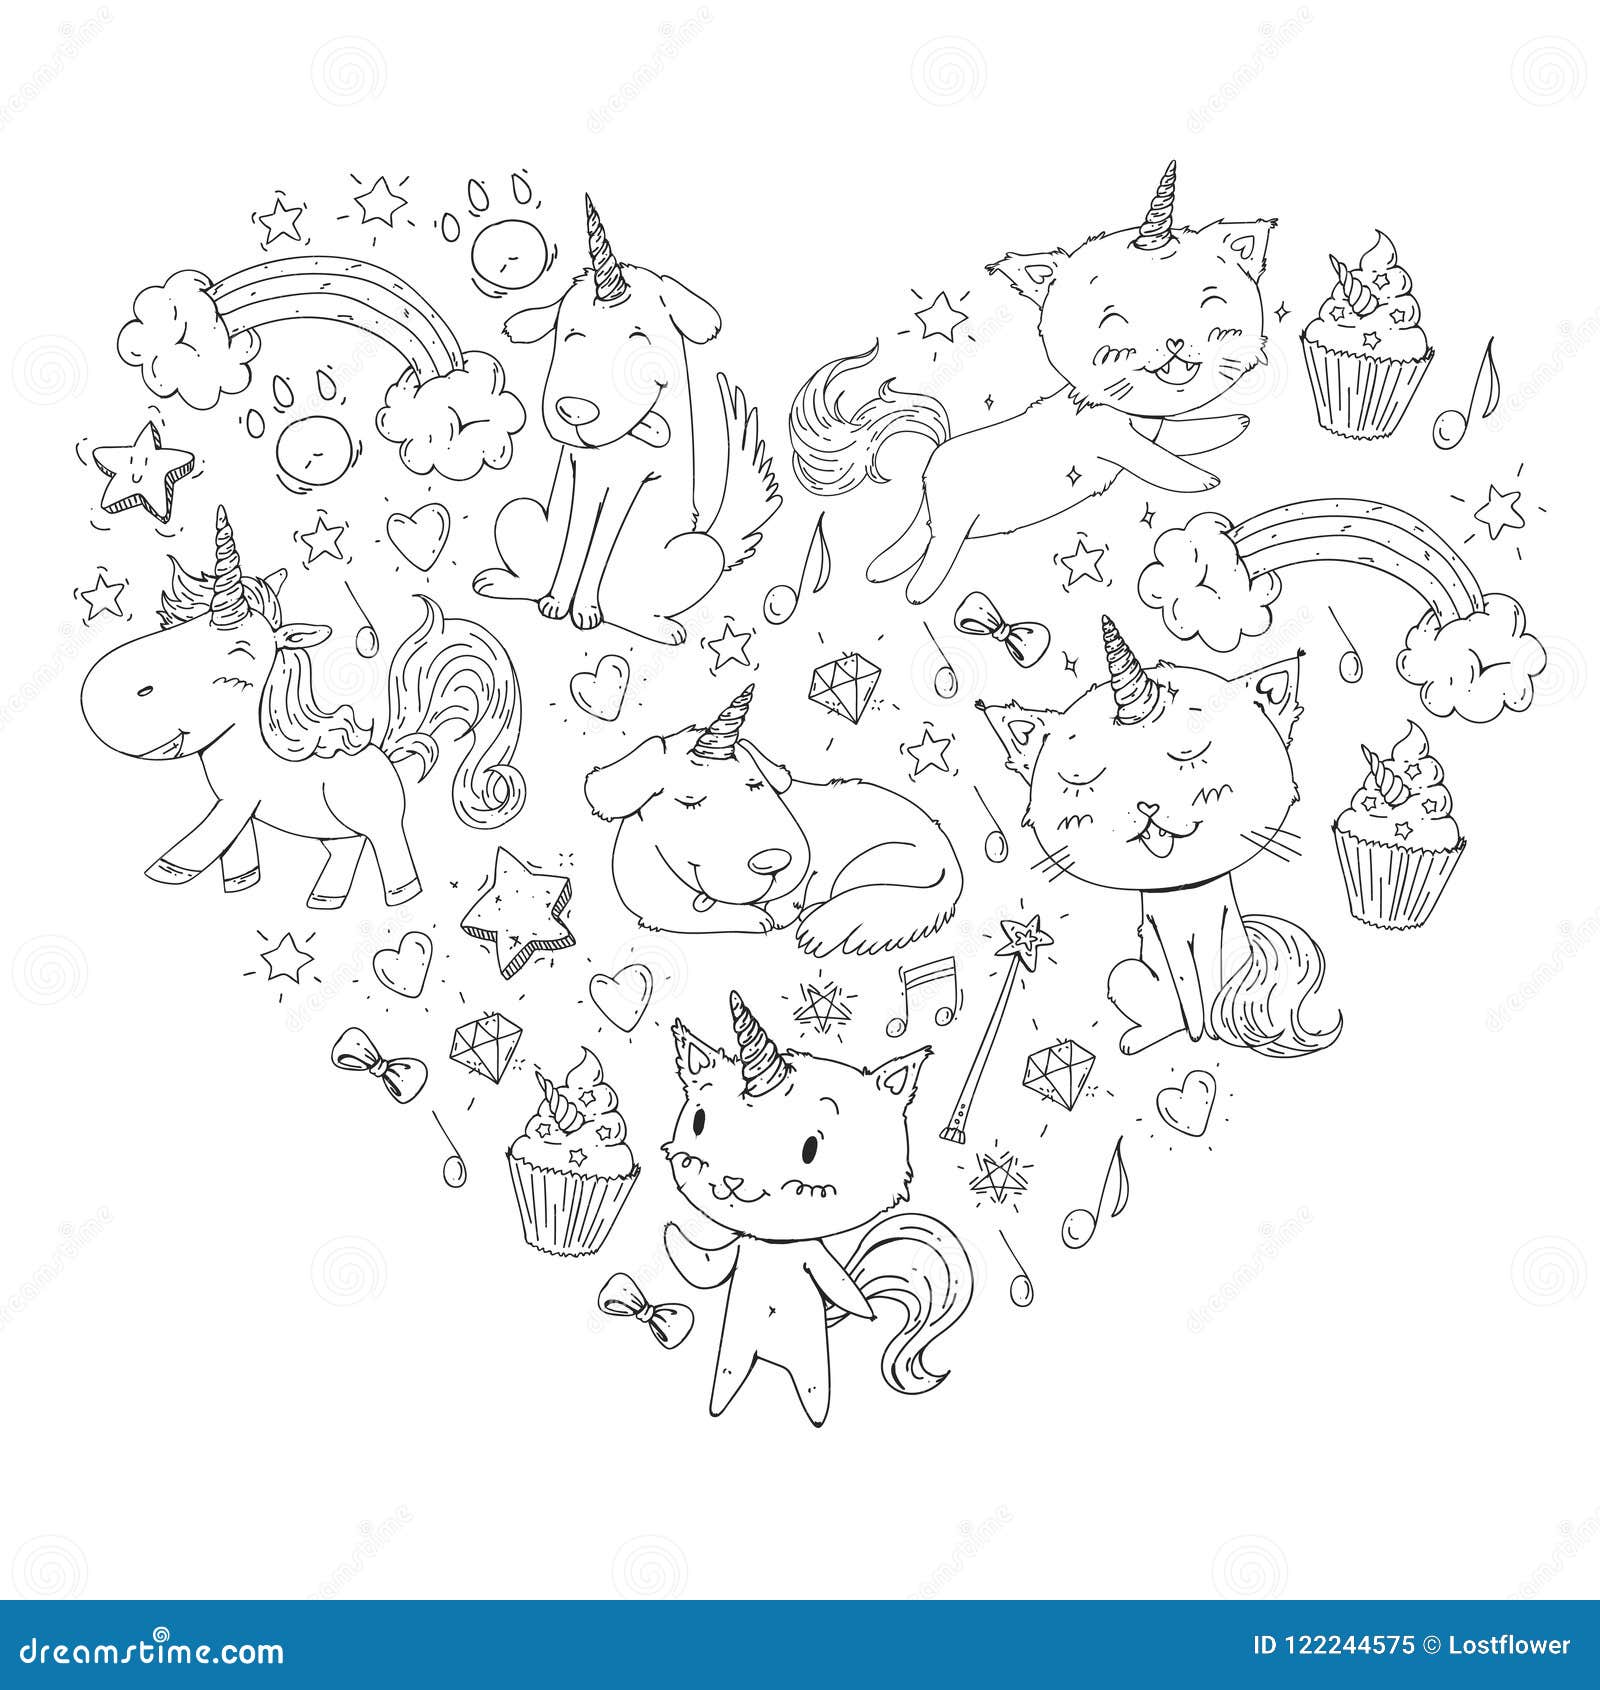 Unicorn. Cats, Dog, Horse, Pony. Vector Image. Coloring Page for ...